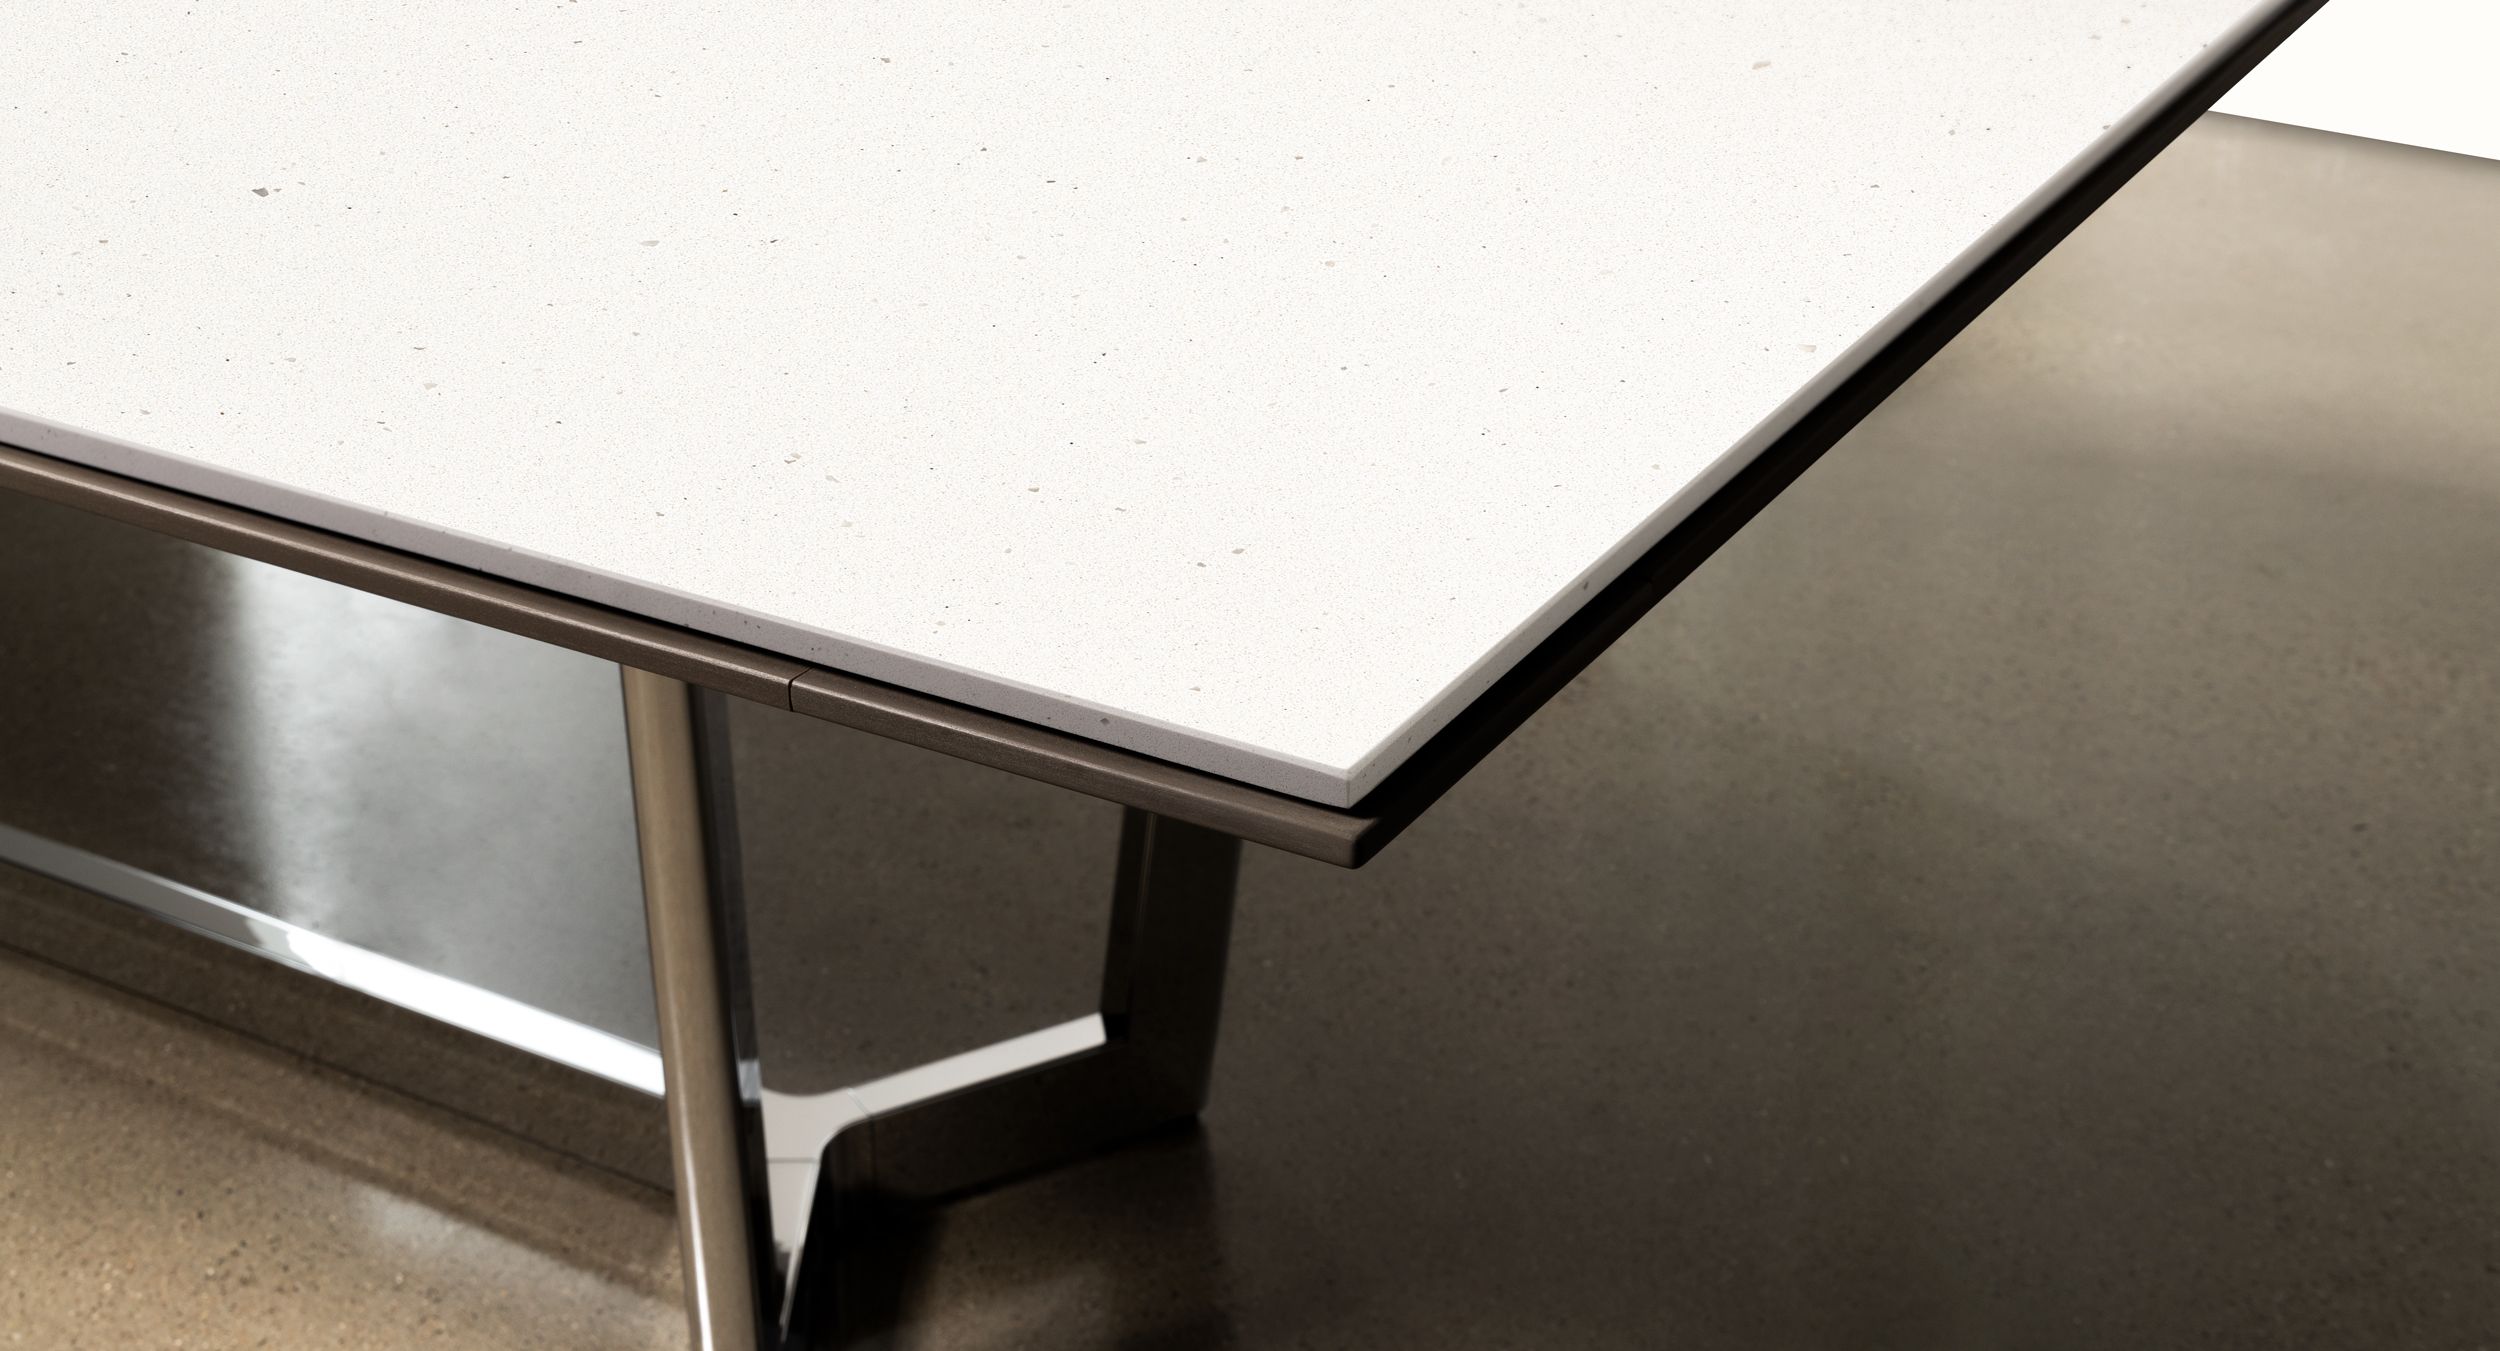 The revolutionary Halo soft edge protects both table and chair from damage. <br> Patent US11154130B2